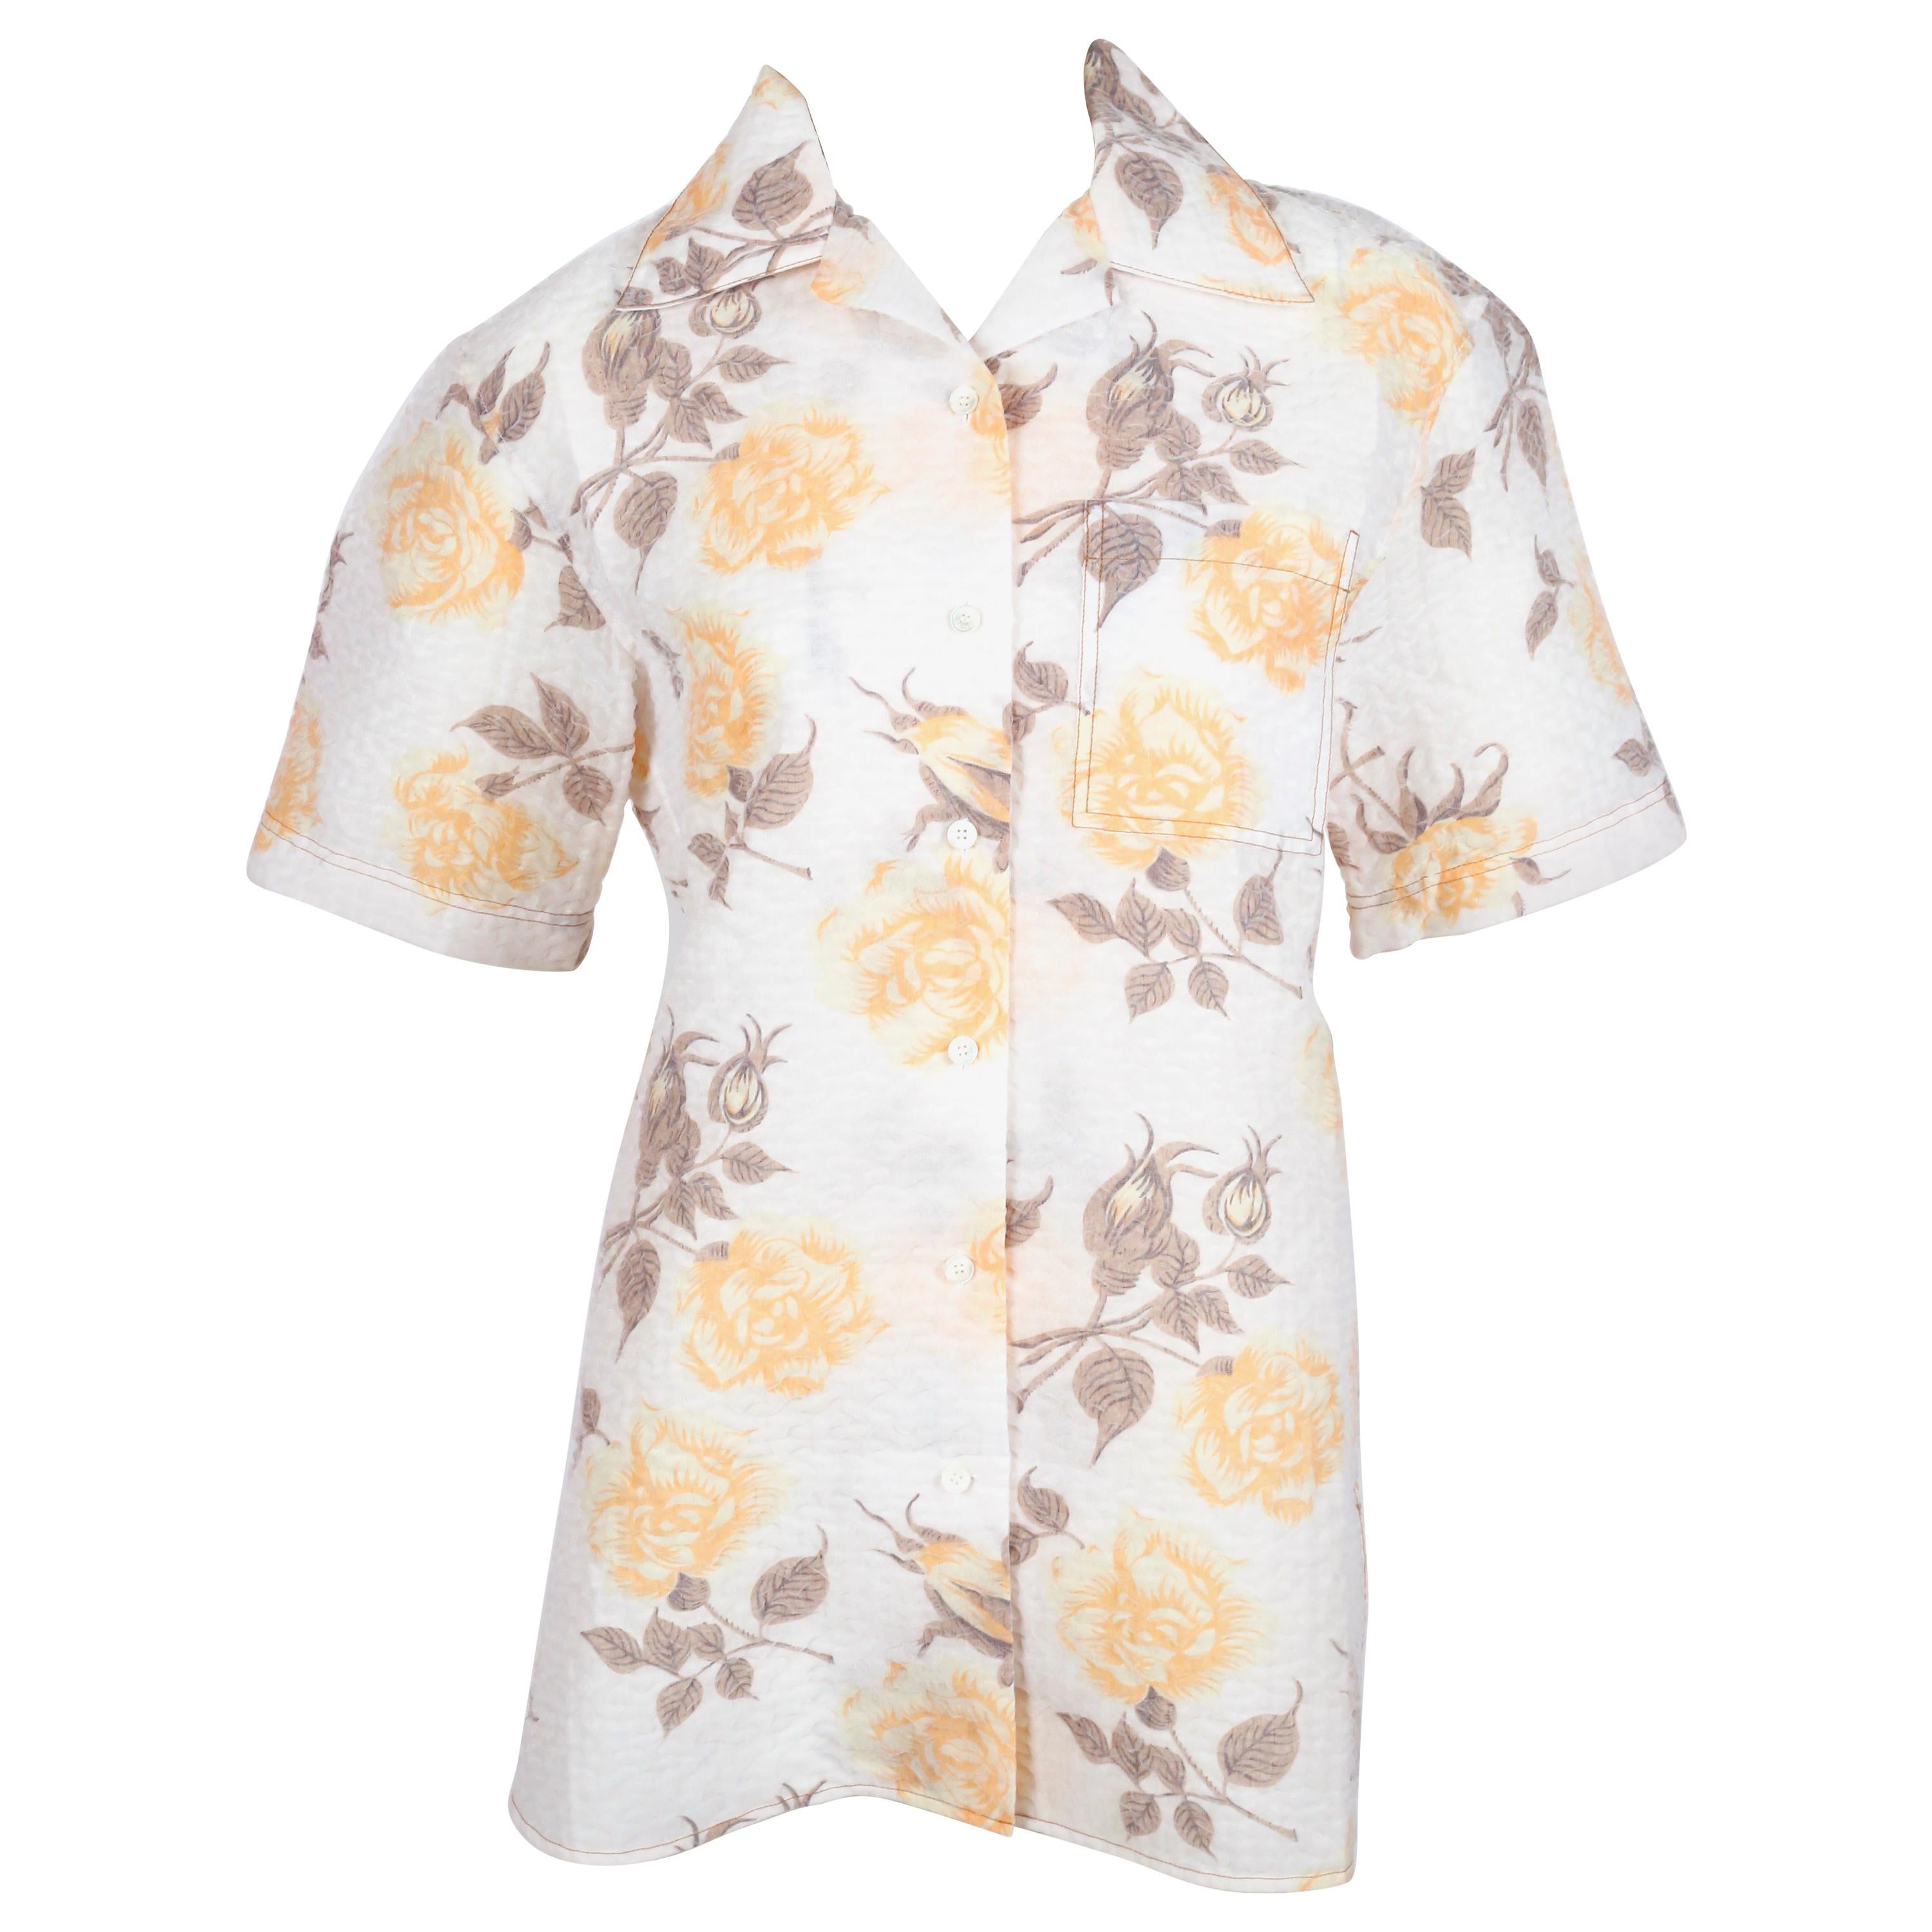 CELINE by PHOEBE PHILO floral printed organza short sleeve shirt - new